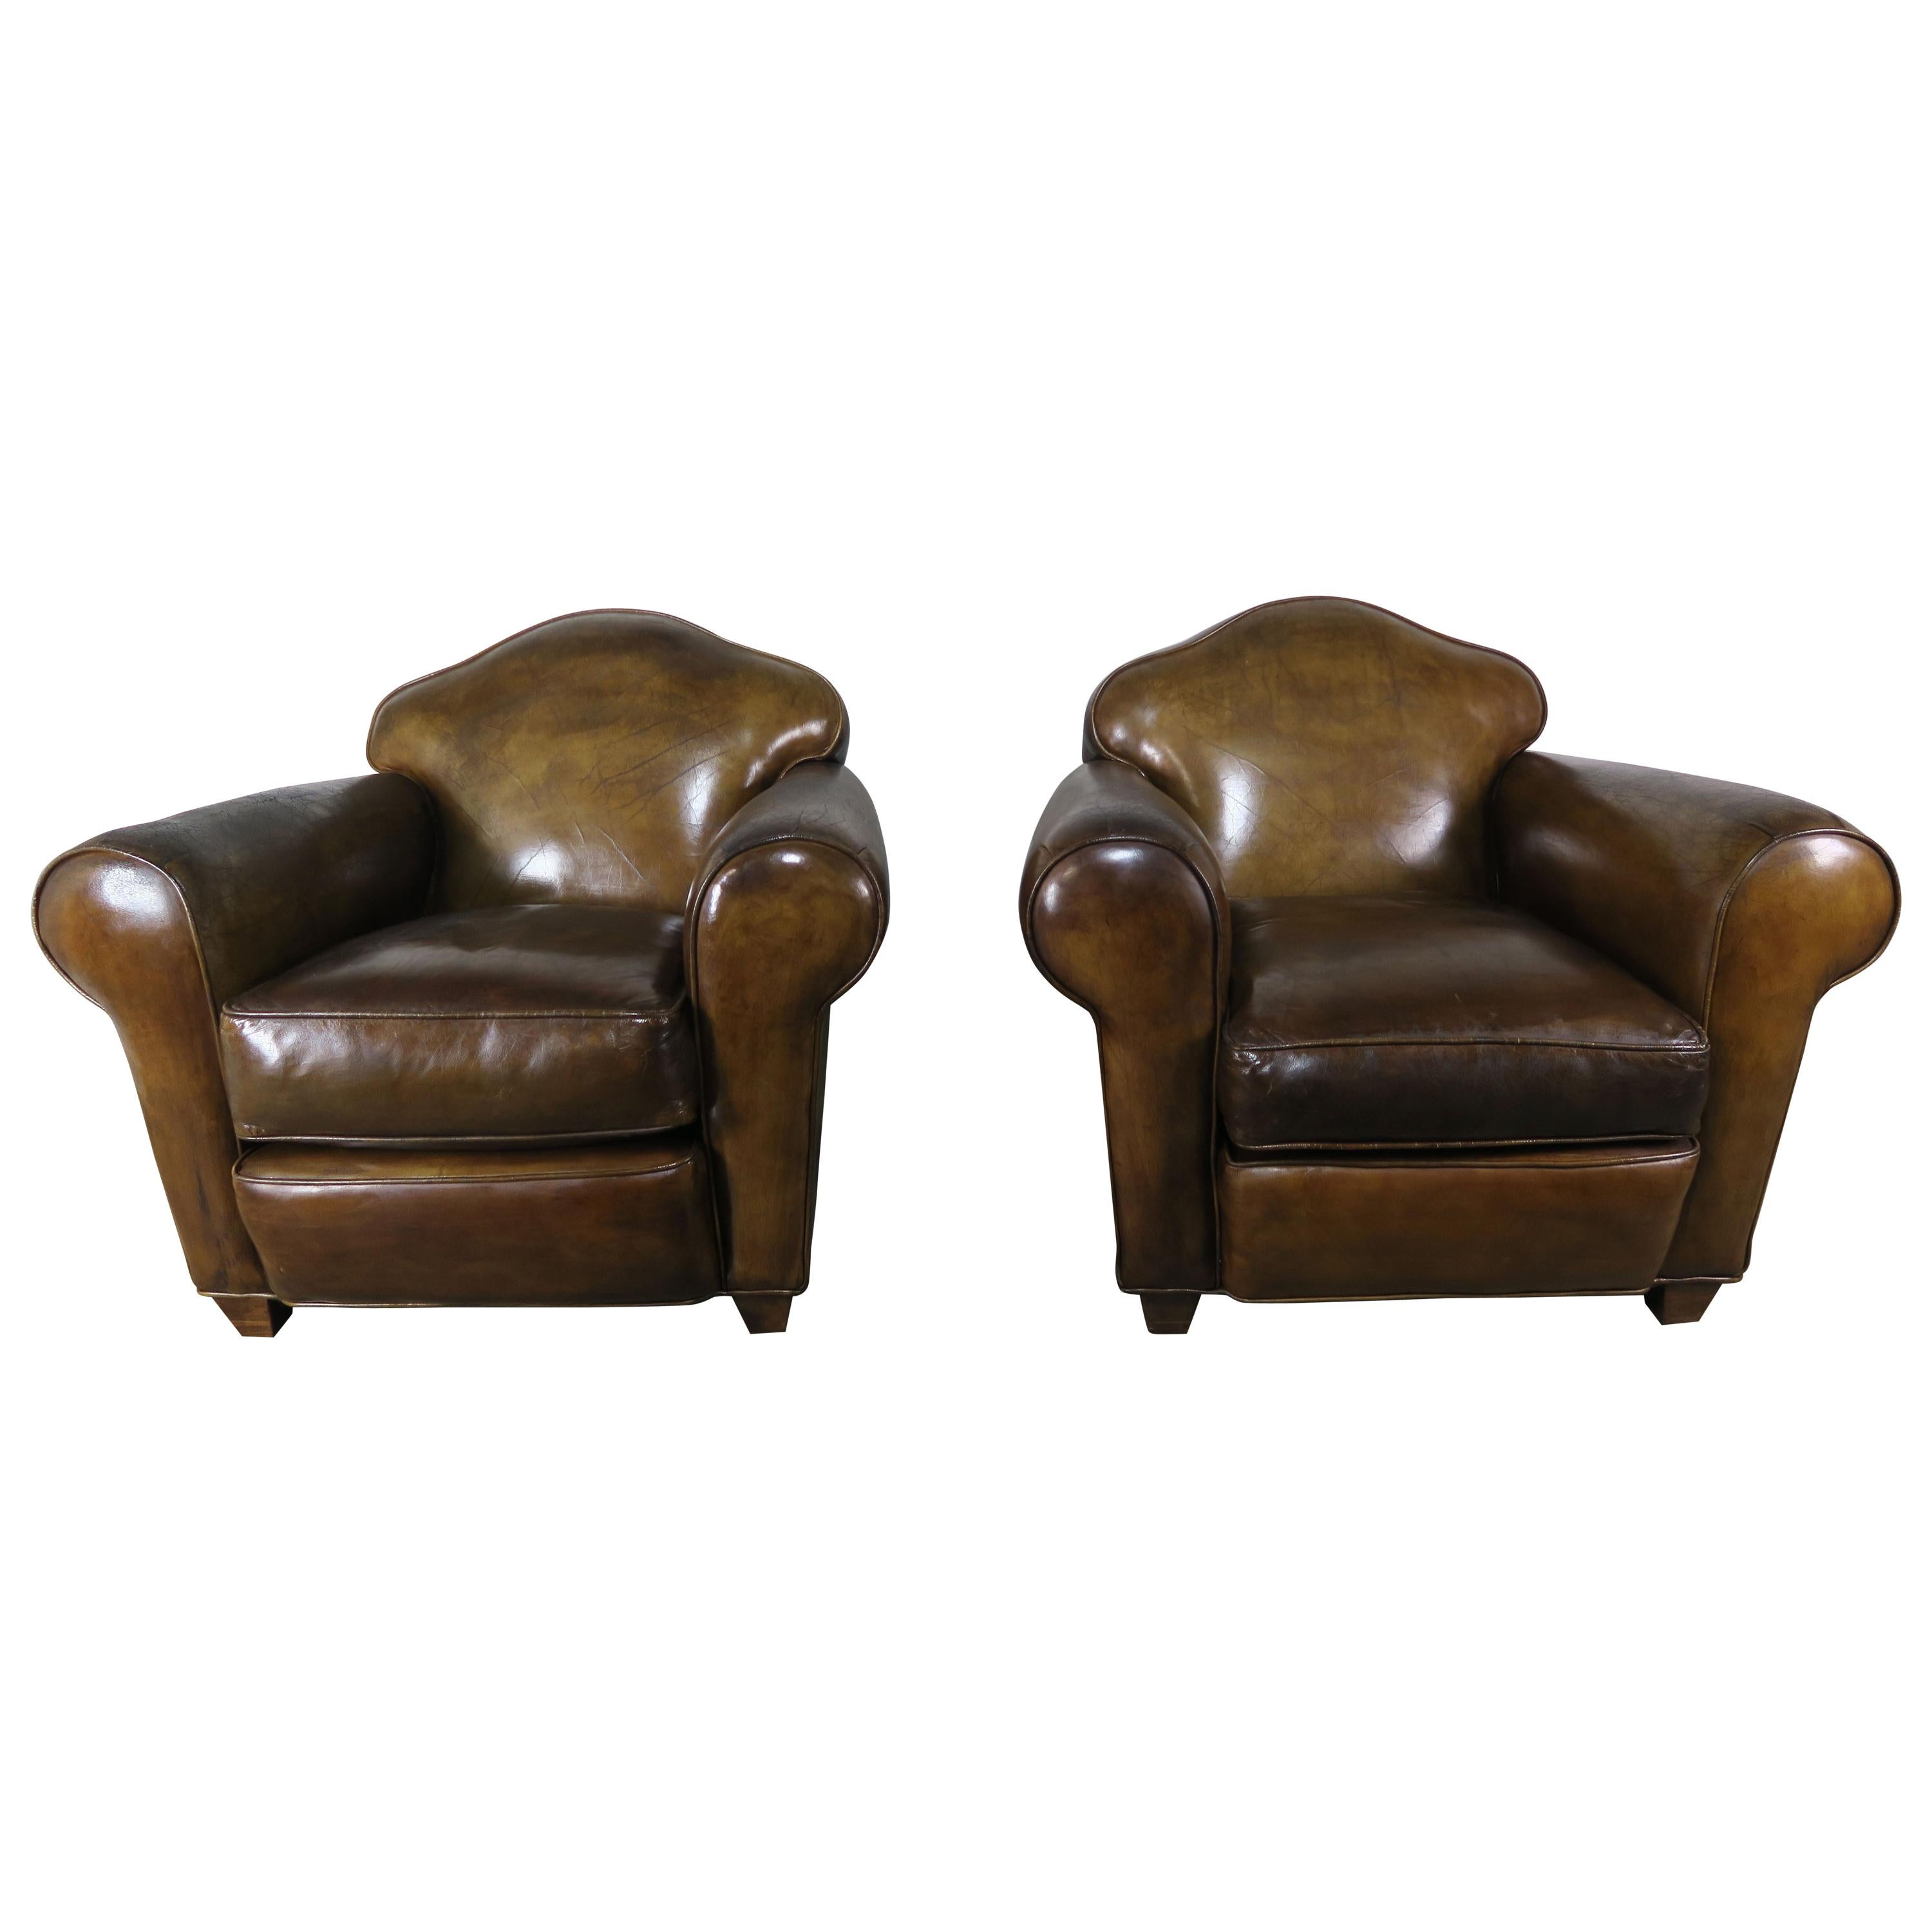 Pair of French Leather Upholstered Club Chairs, circa 1940s